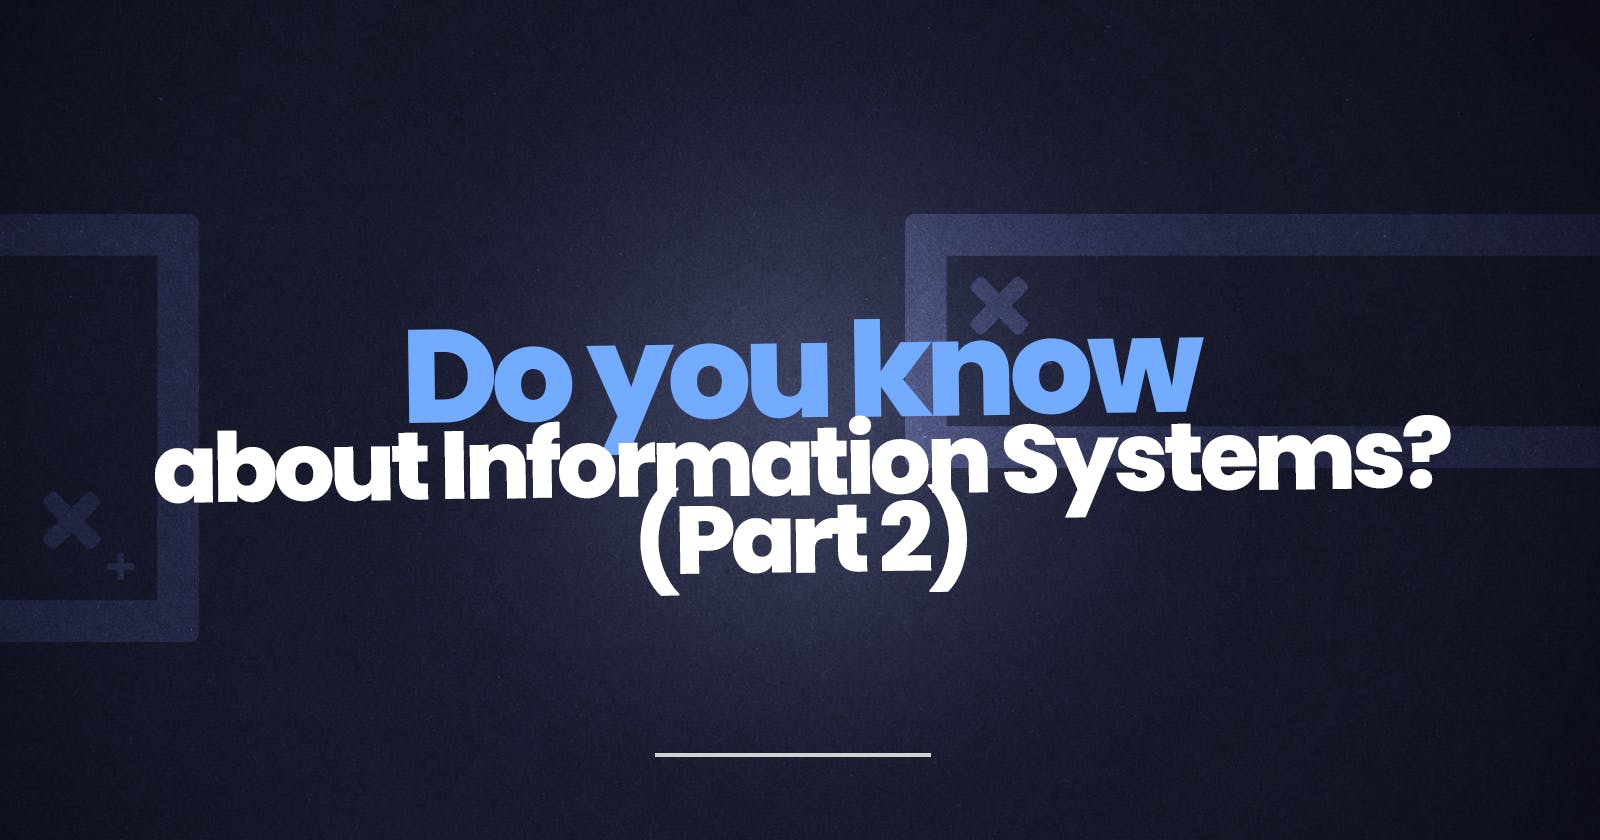 Do you know about Information Systems? 
( Part 2 )